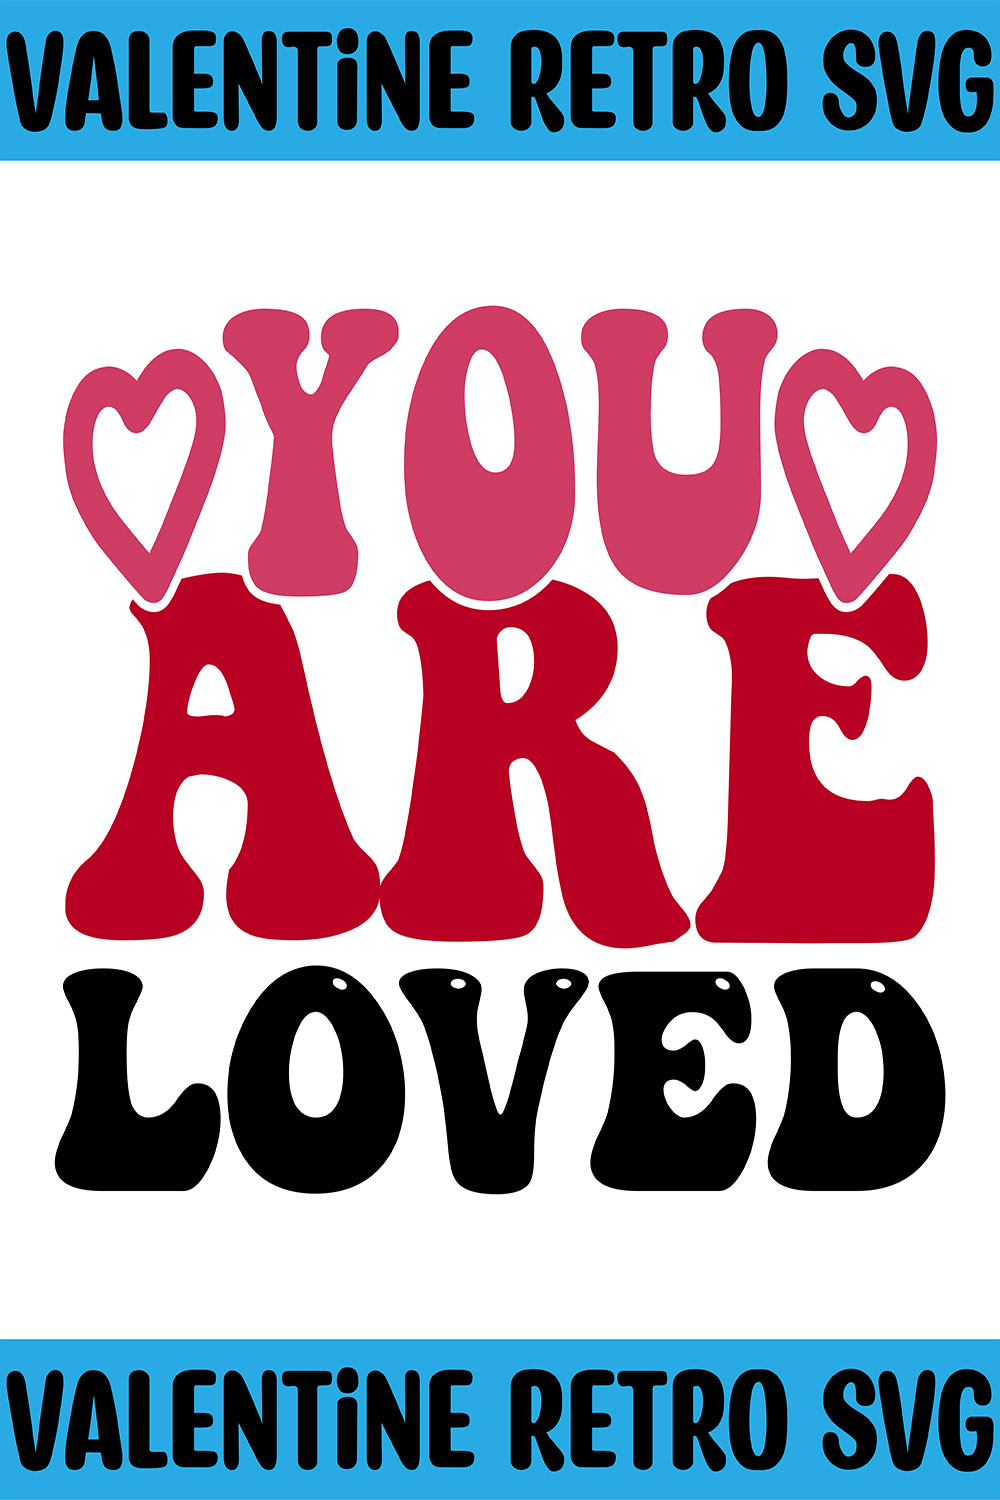 You Are Loved Retro SVG pinterest preview image.